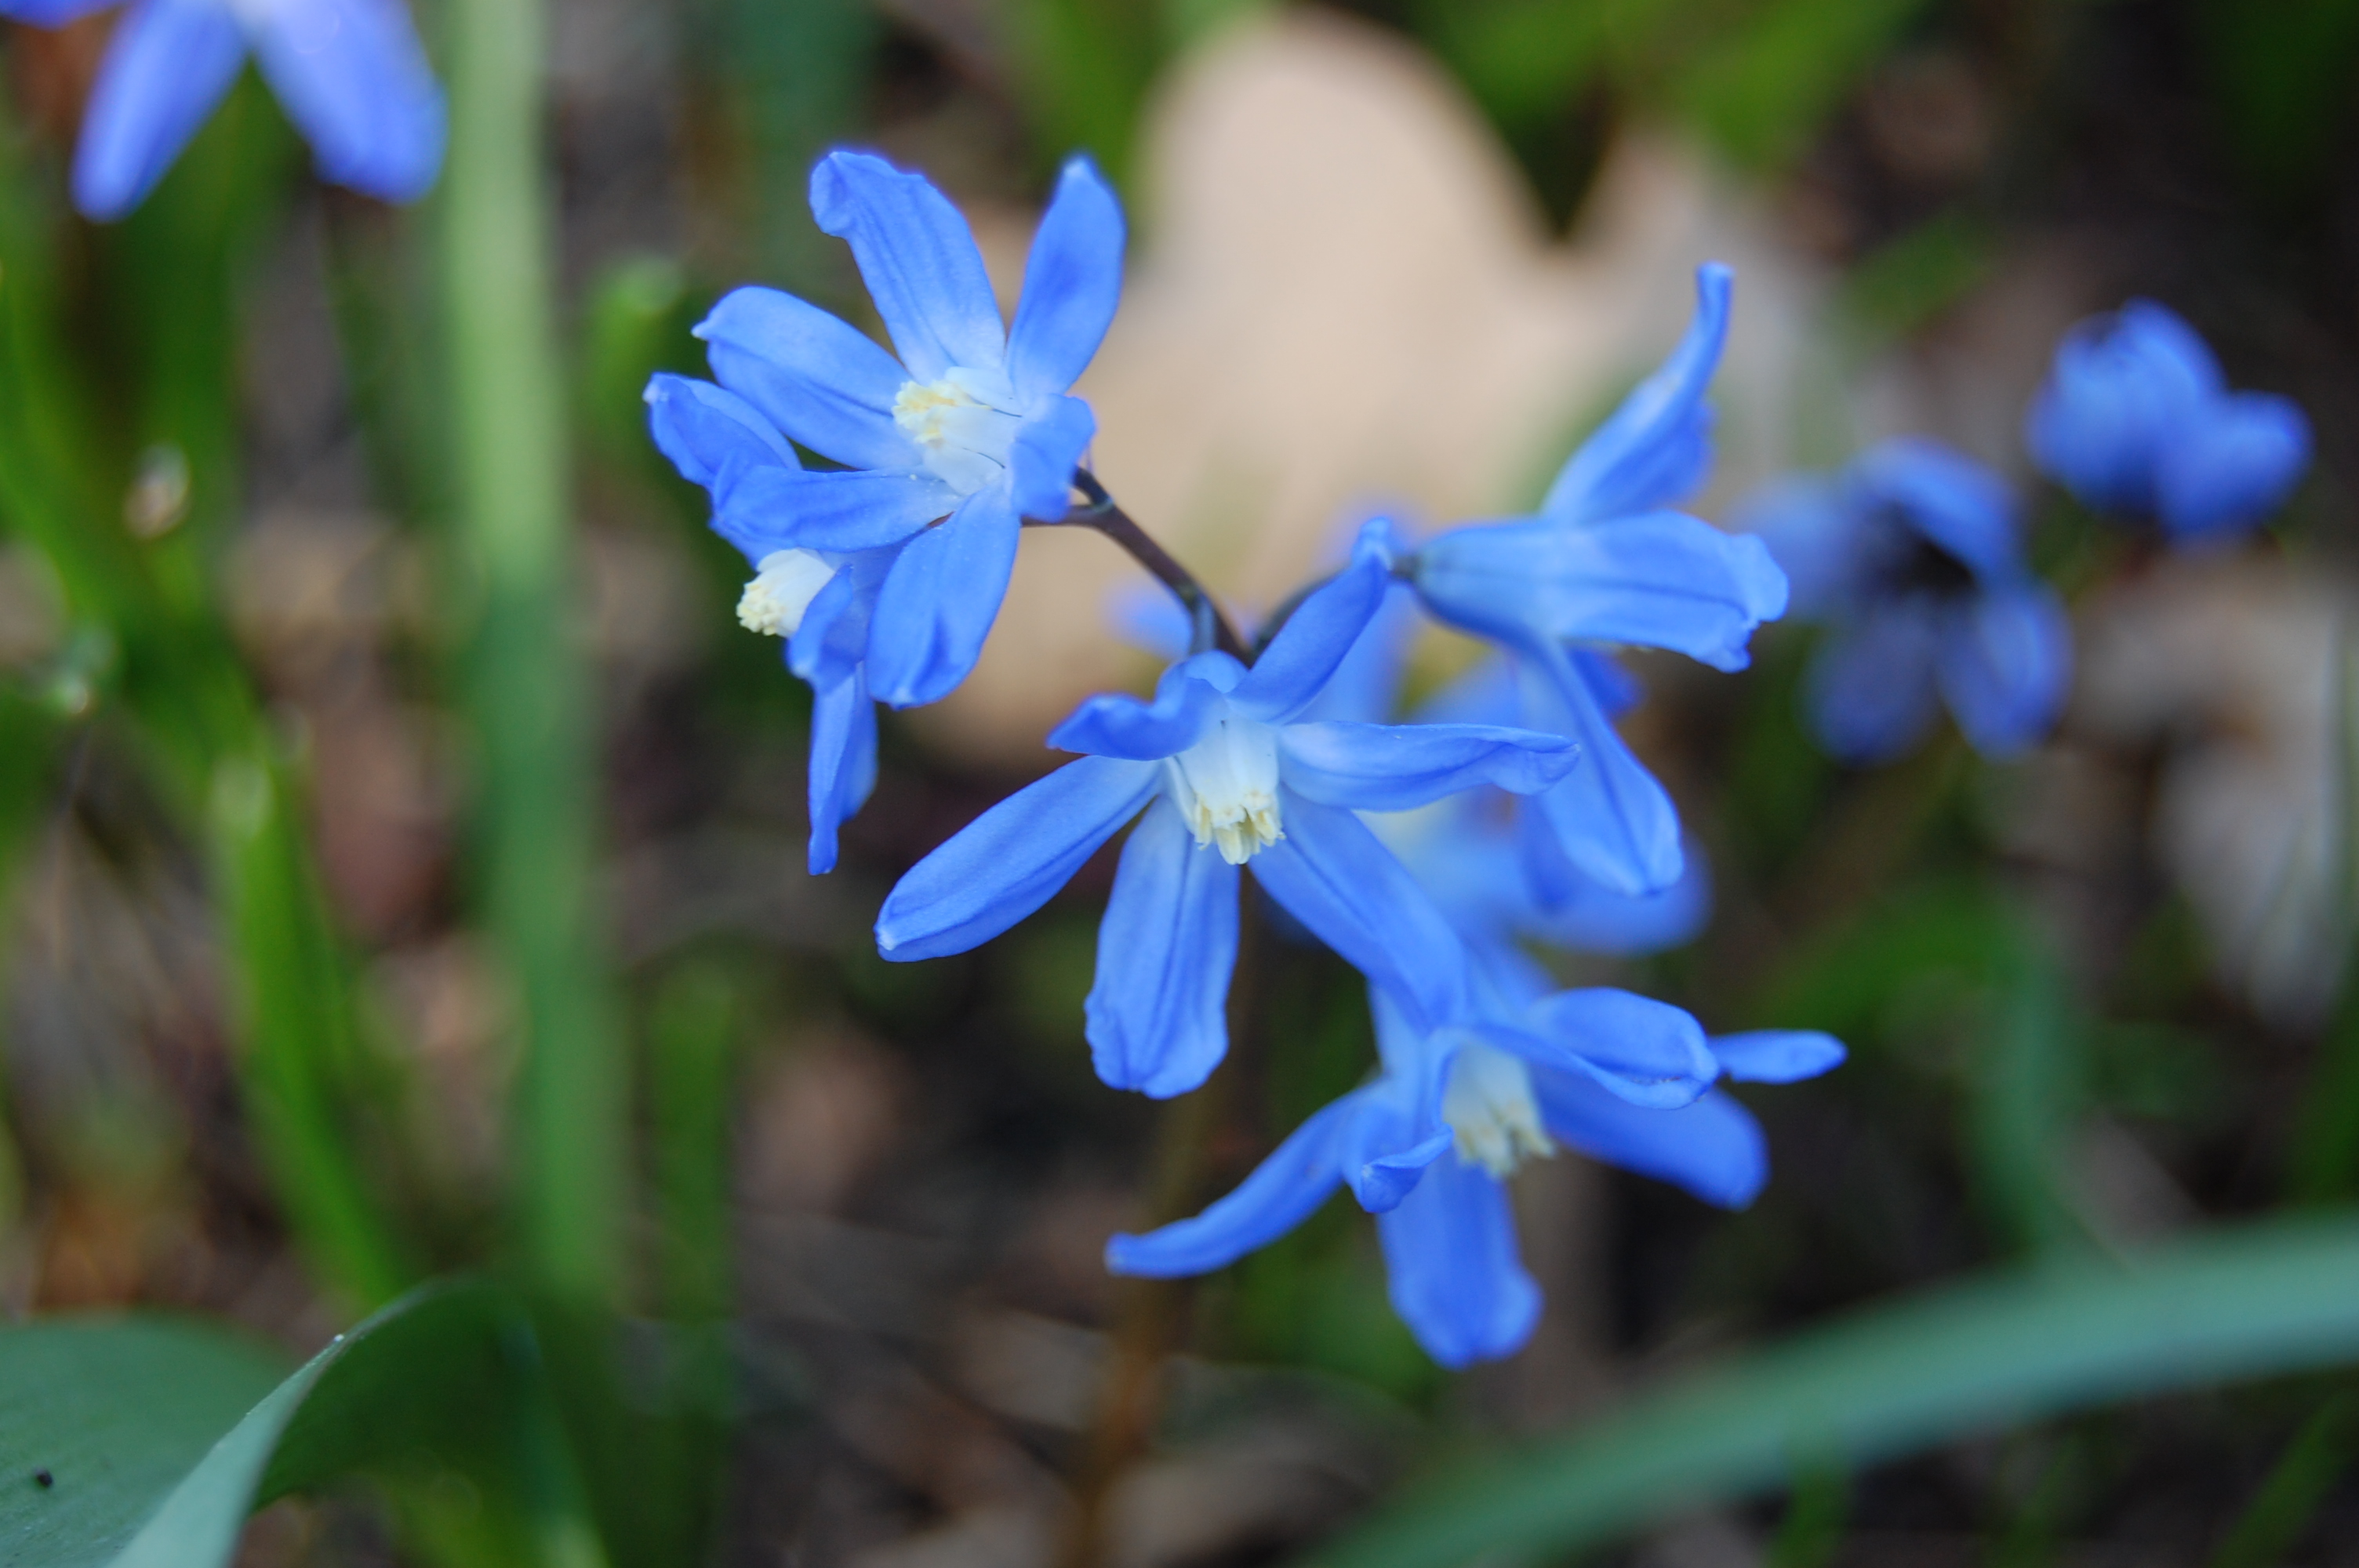 Chionodoxa forbesii | landscape architect's pages